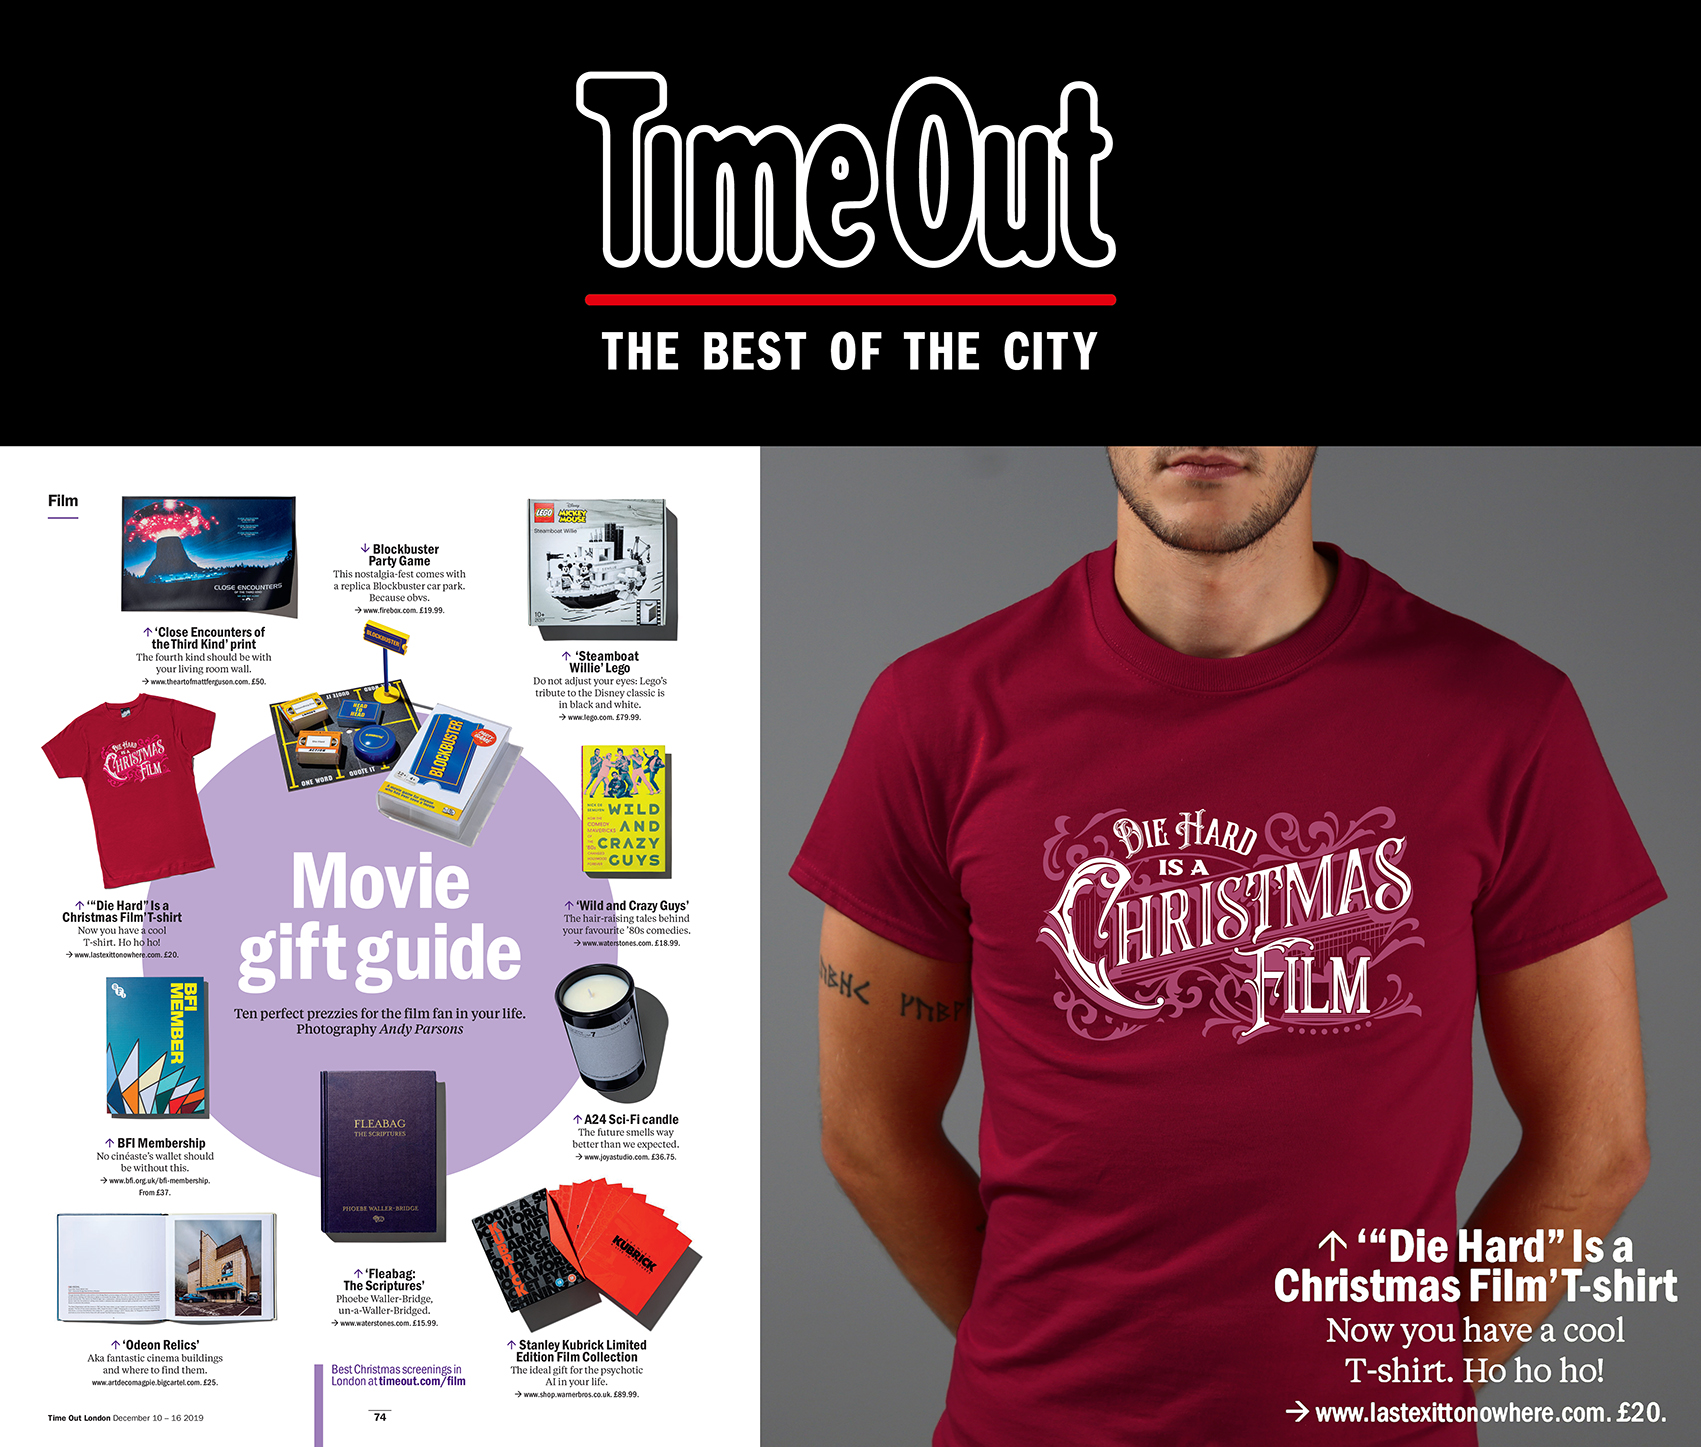 LAST EXIT TO NOWHERE IN TIME OUT LONDON'S GIFT GUIDE